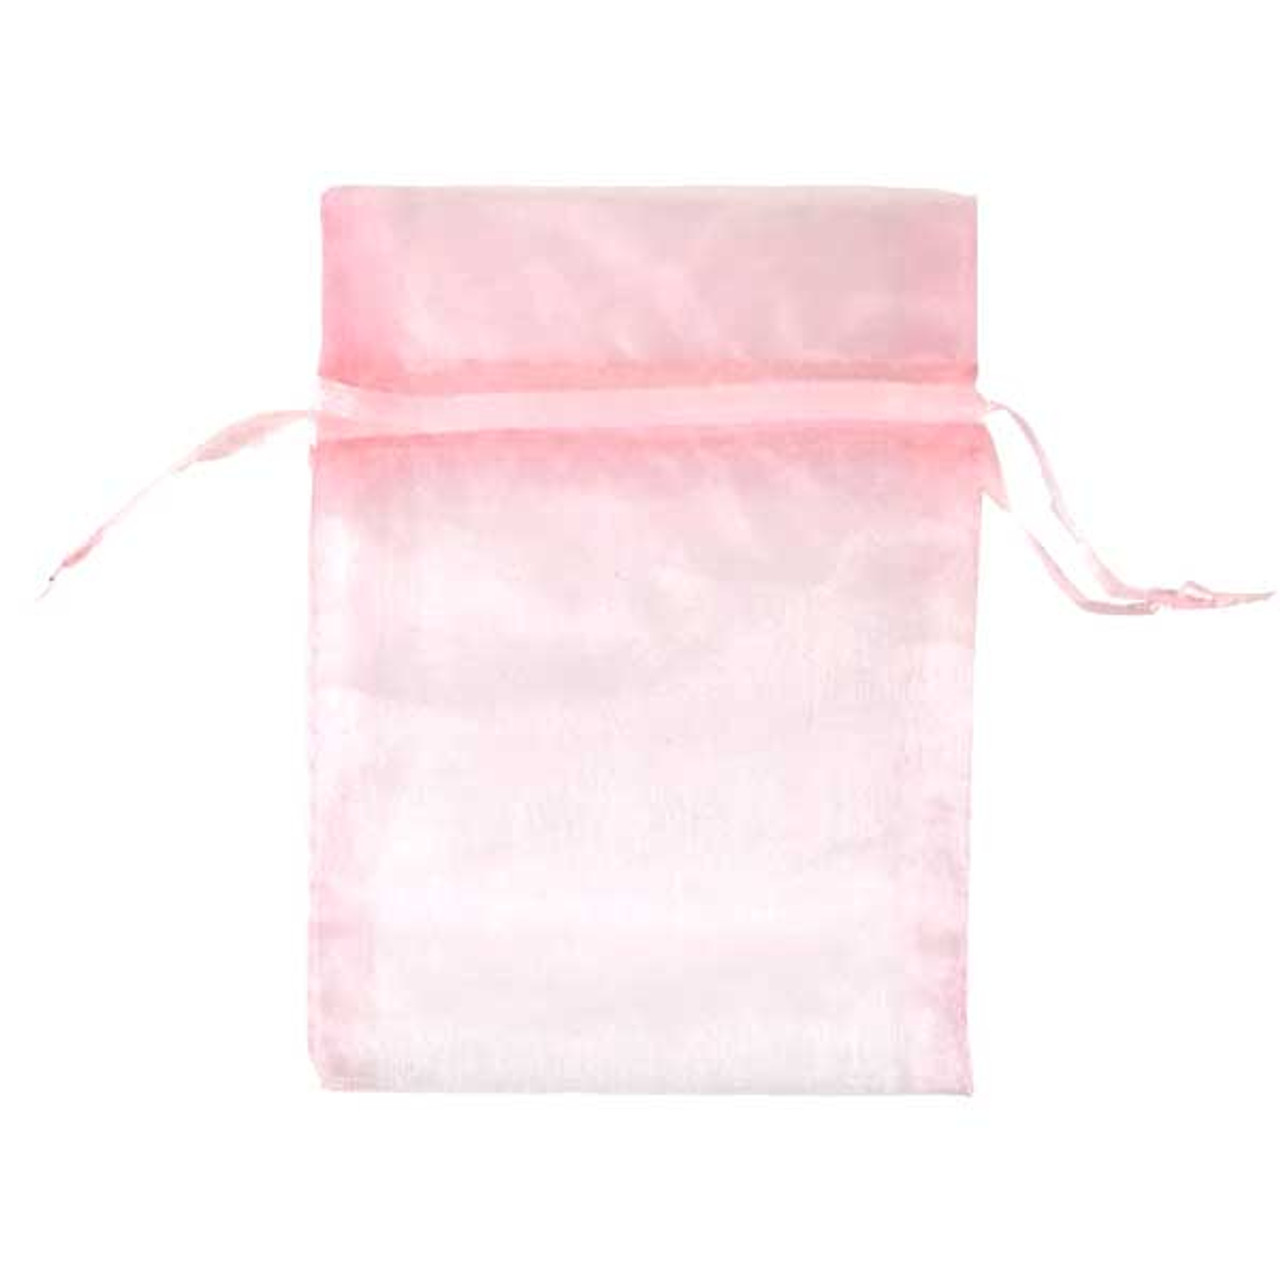 Pink Small Economy Organza Bags 3" x 4" pkg. 10